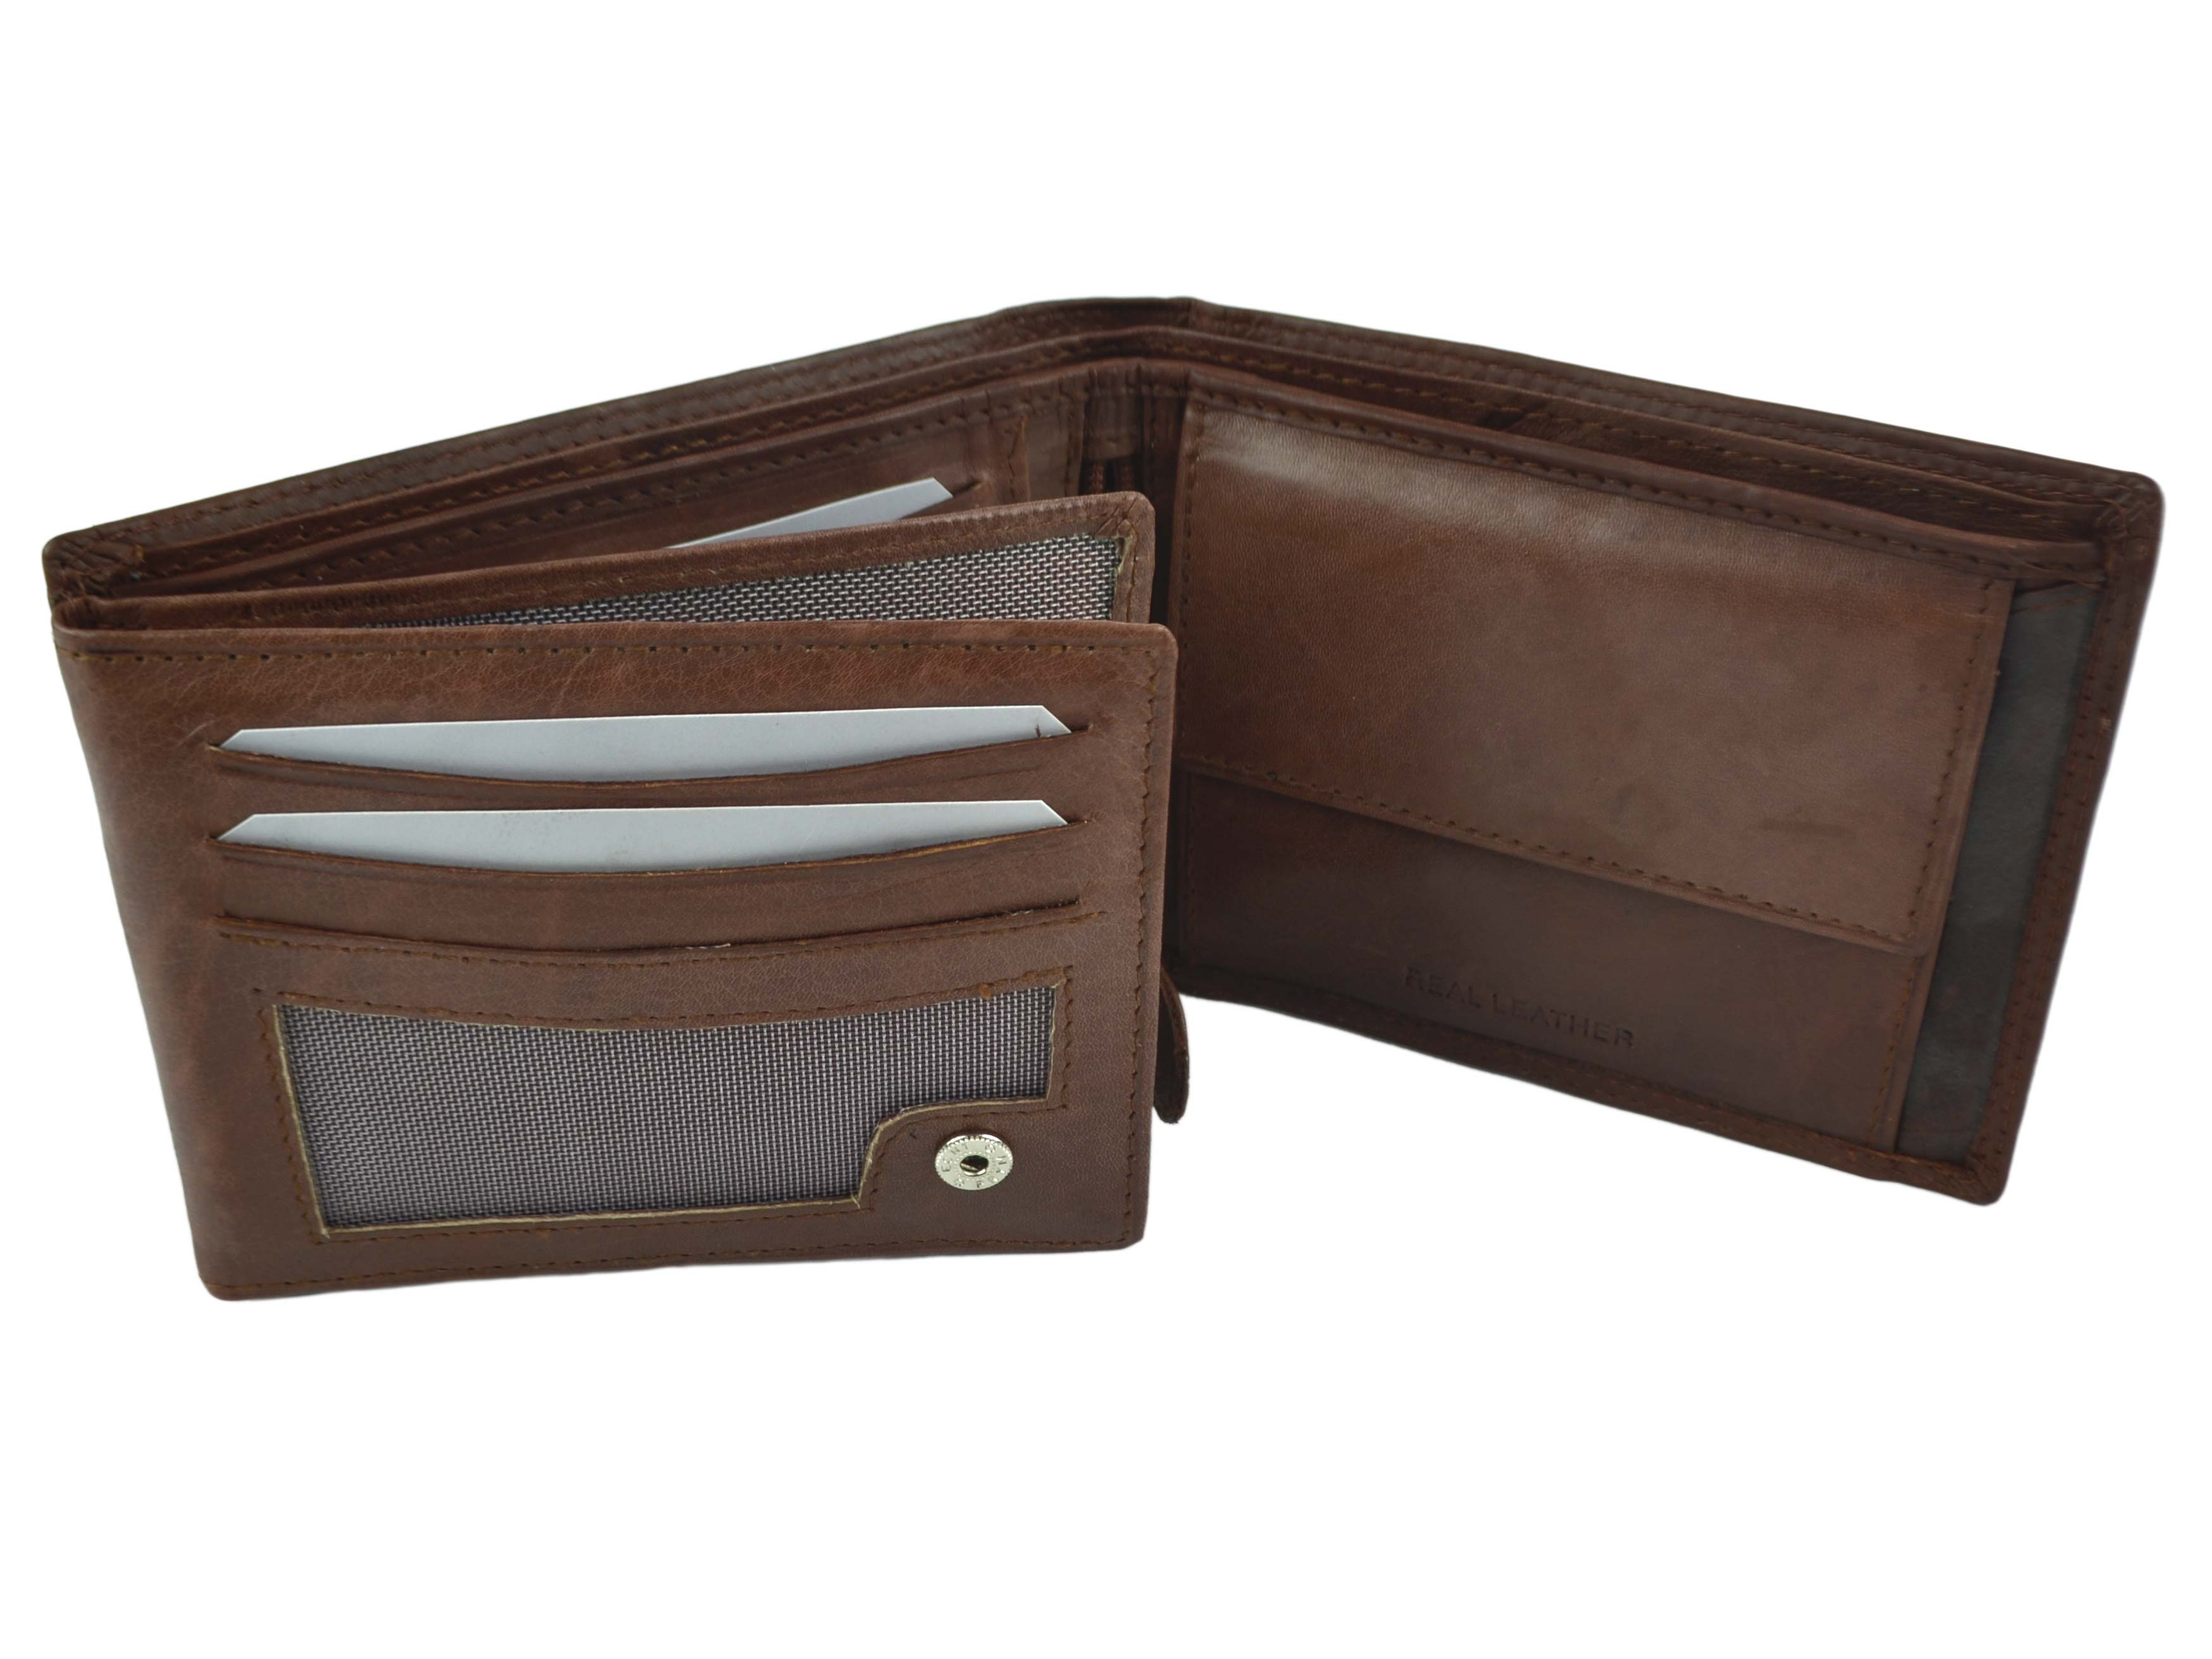 Mens Quality Soft Leather Wallet by London Leather Goods Trifold